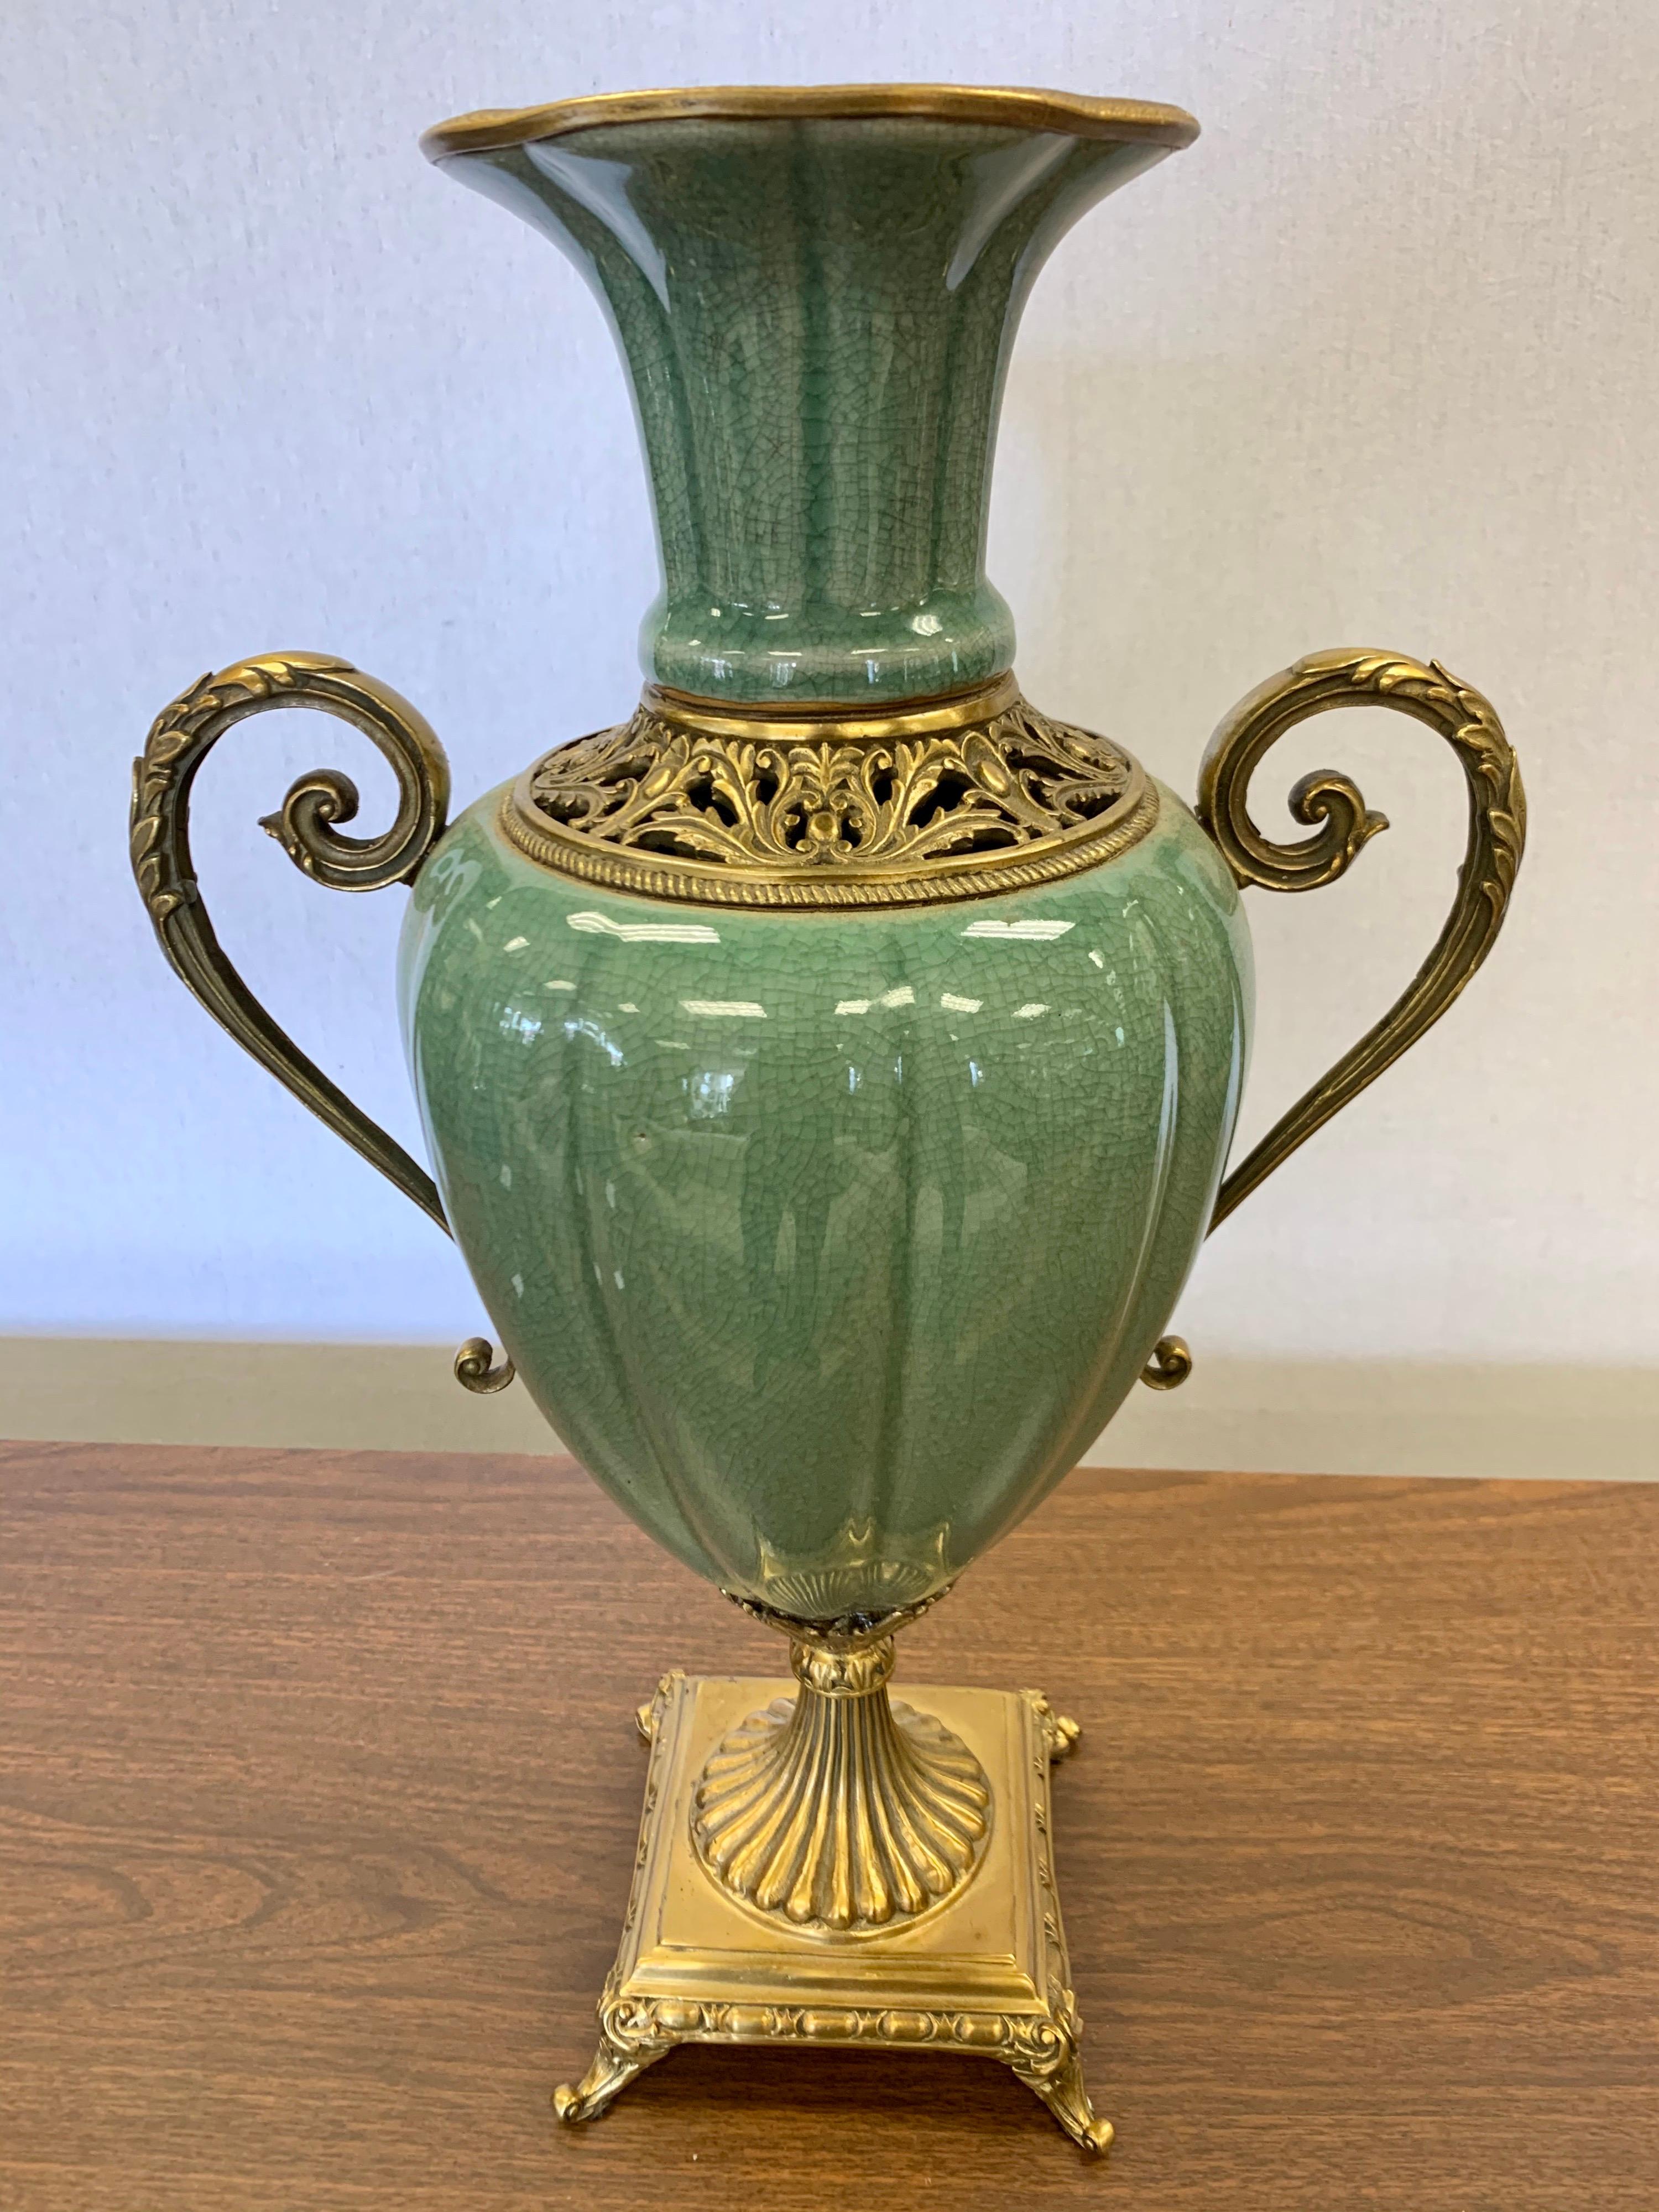 Elegant celadon porcelain large vase or urn with brass handles and mounts. The colors are spectacular.
Great scale as well. Now, more than ever, home is where the heart is.